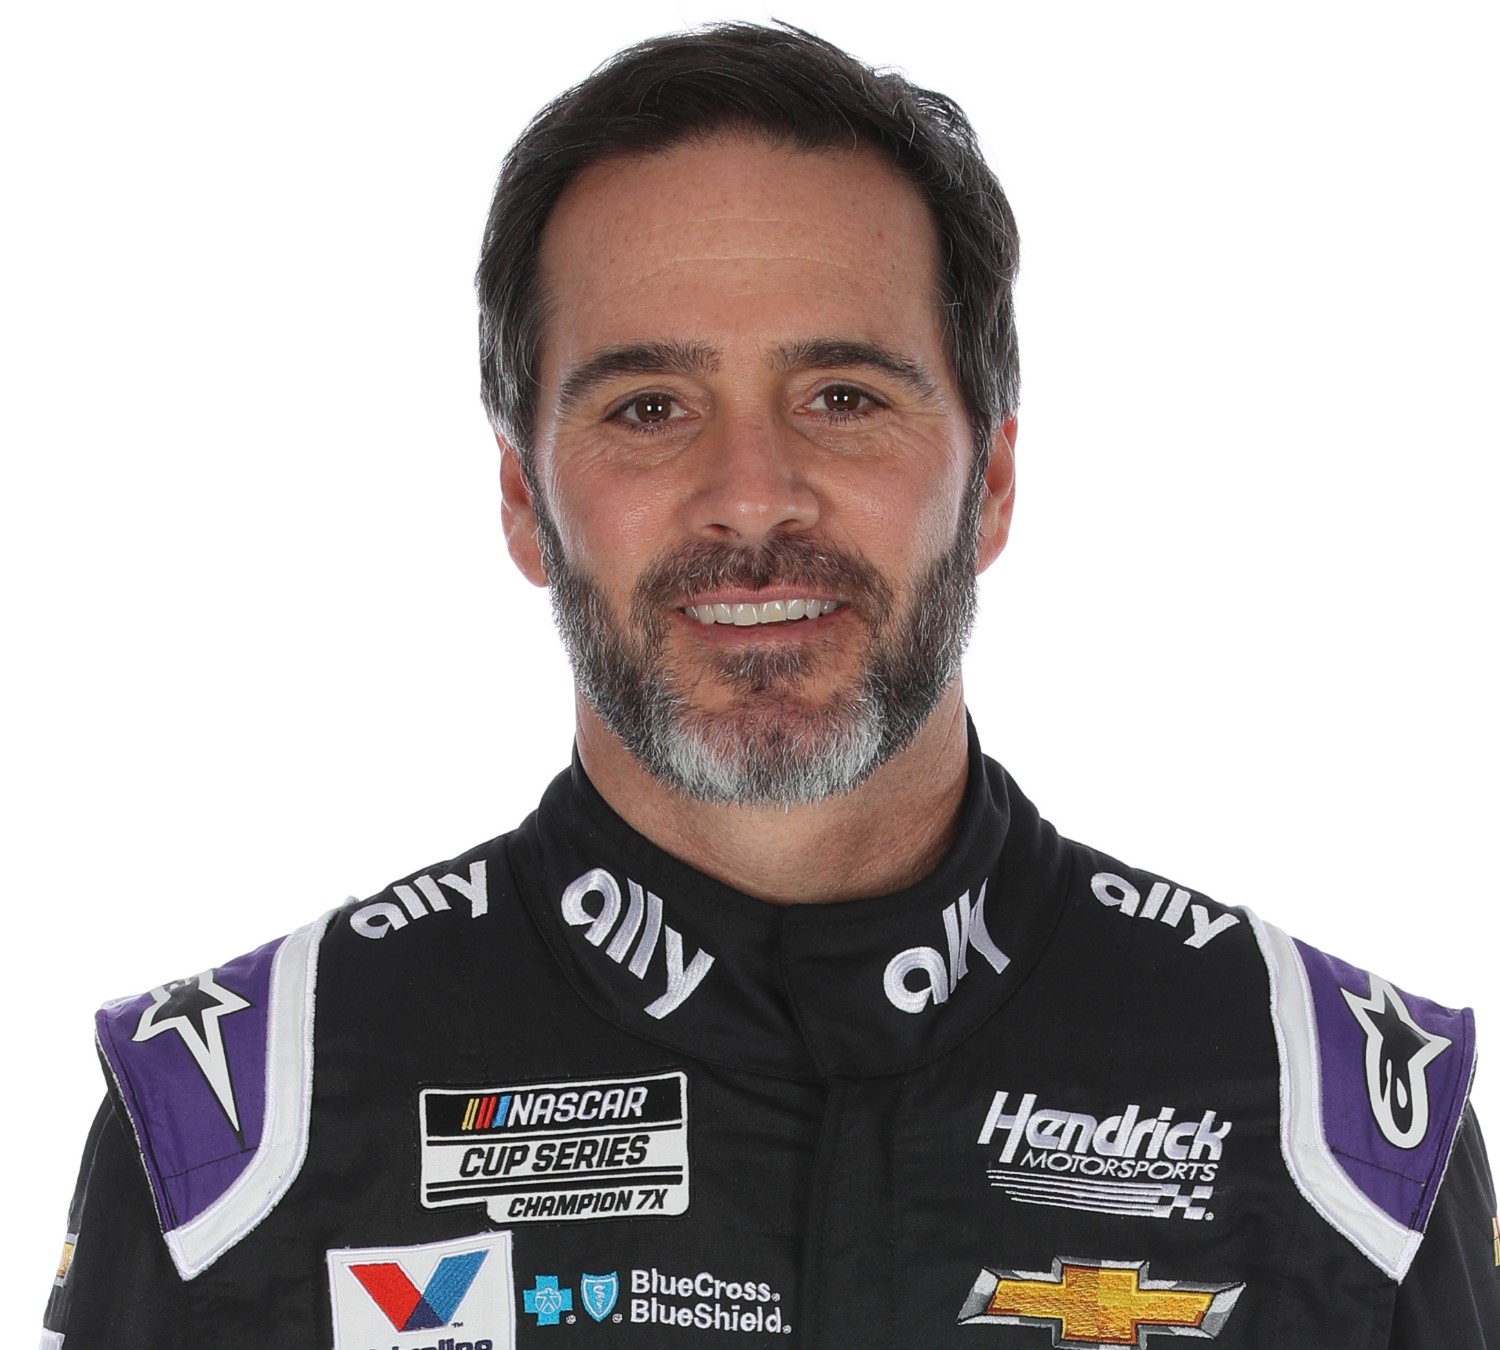 Jimmie Johnson's better days are behind him